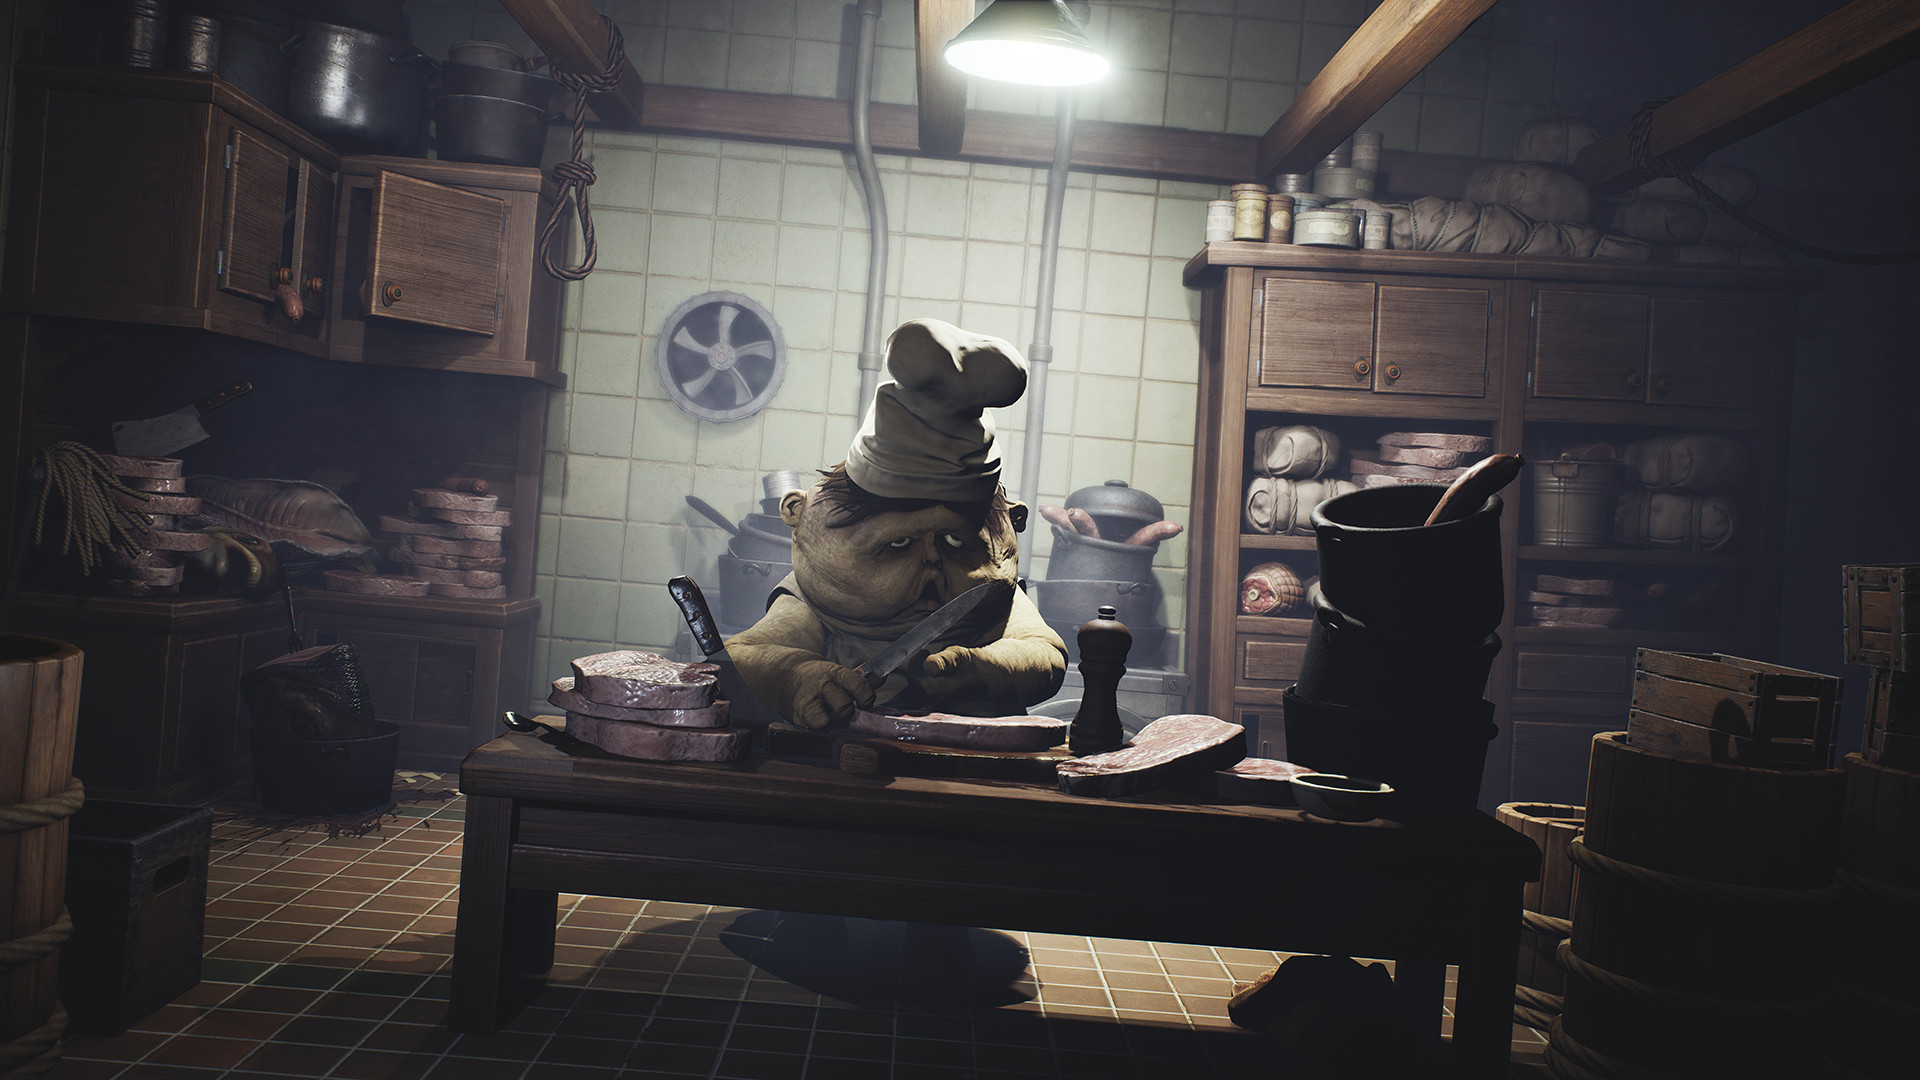 Little Nightmares System Requirements